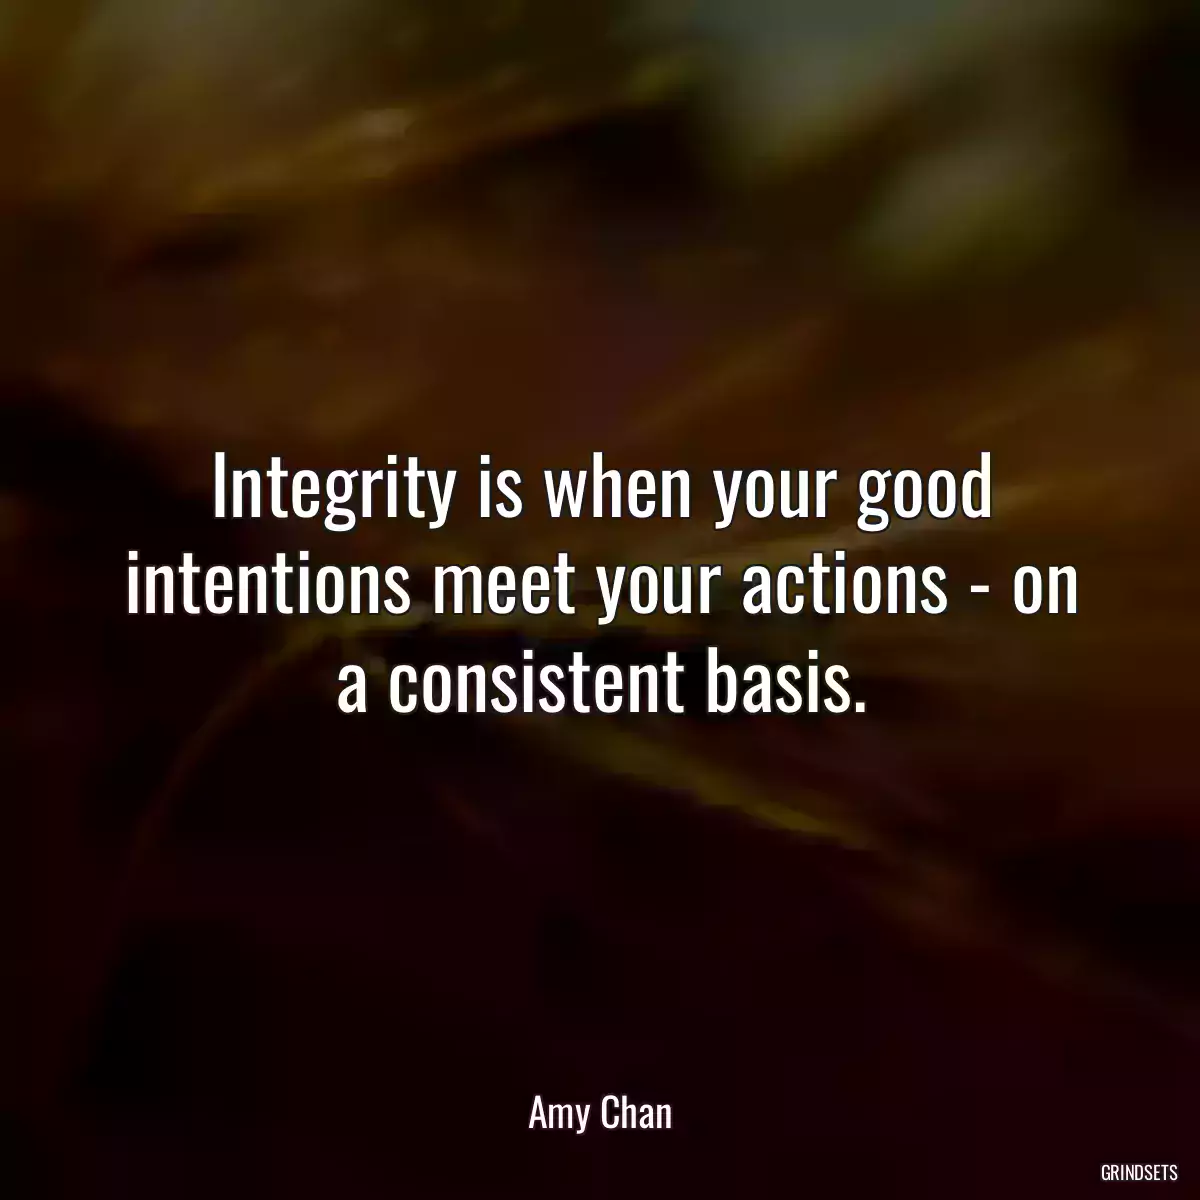 Integrity is when your good intentions meet your actions - on a consistent basis.